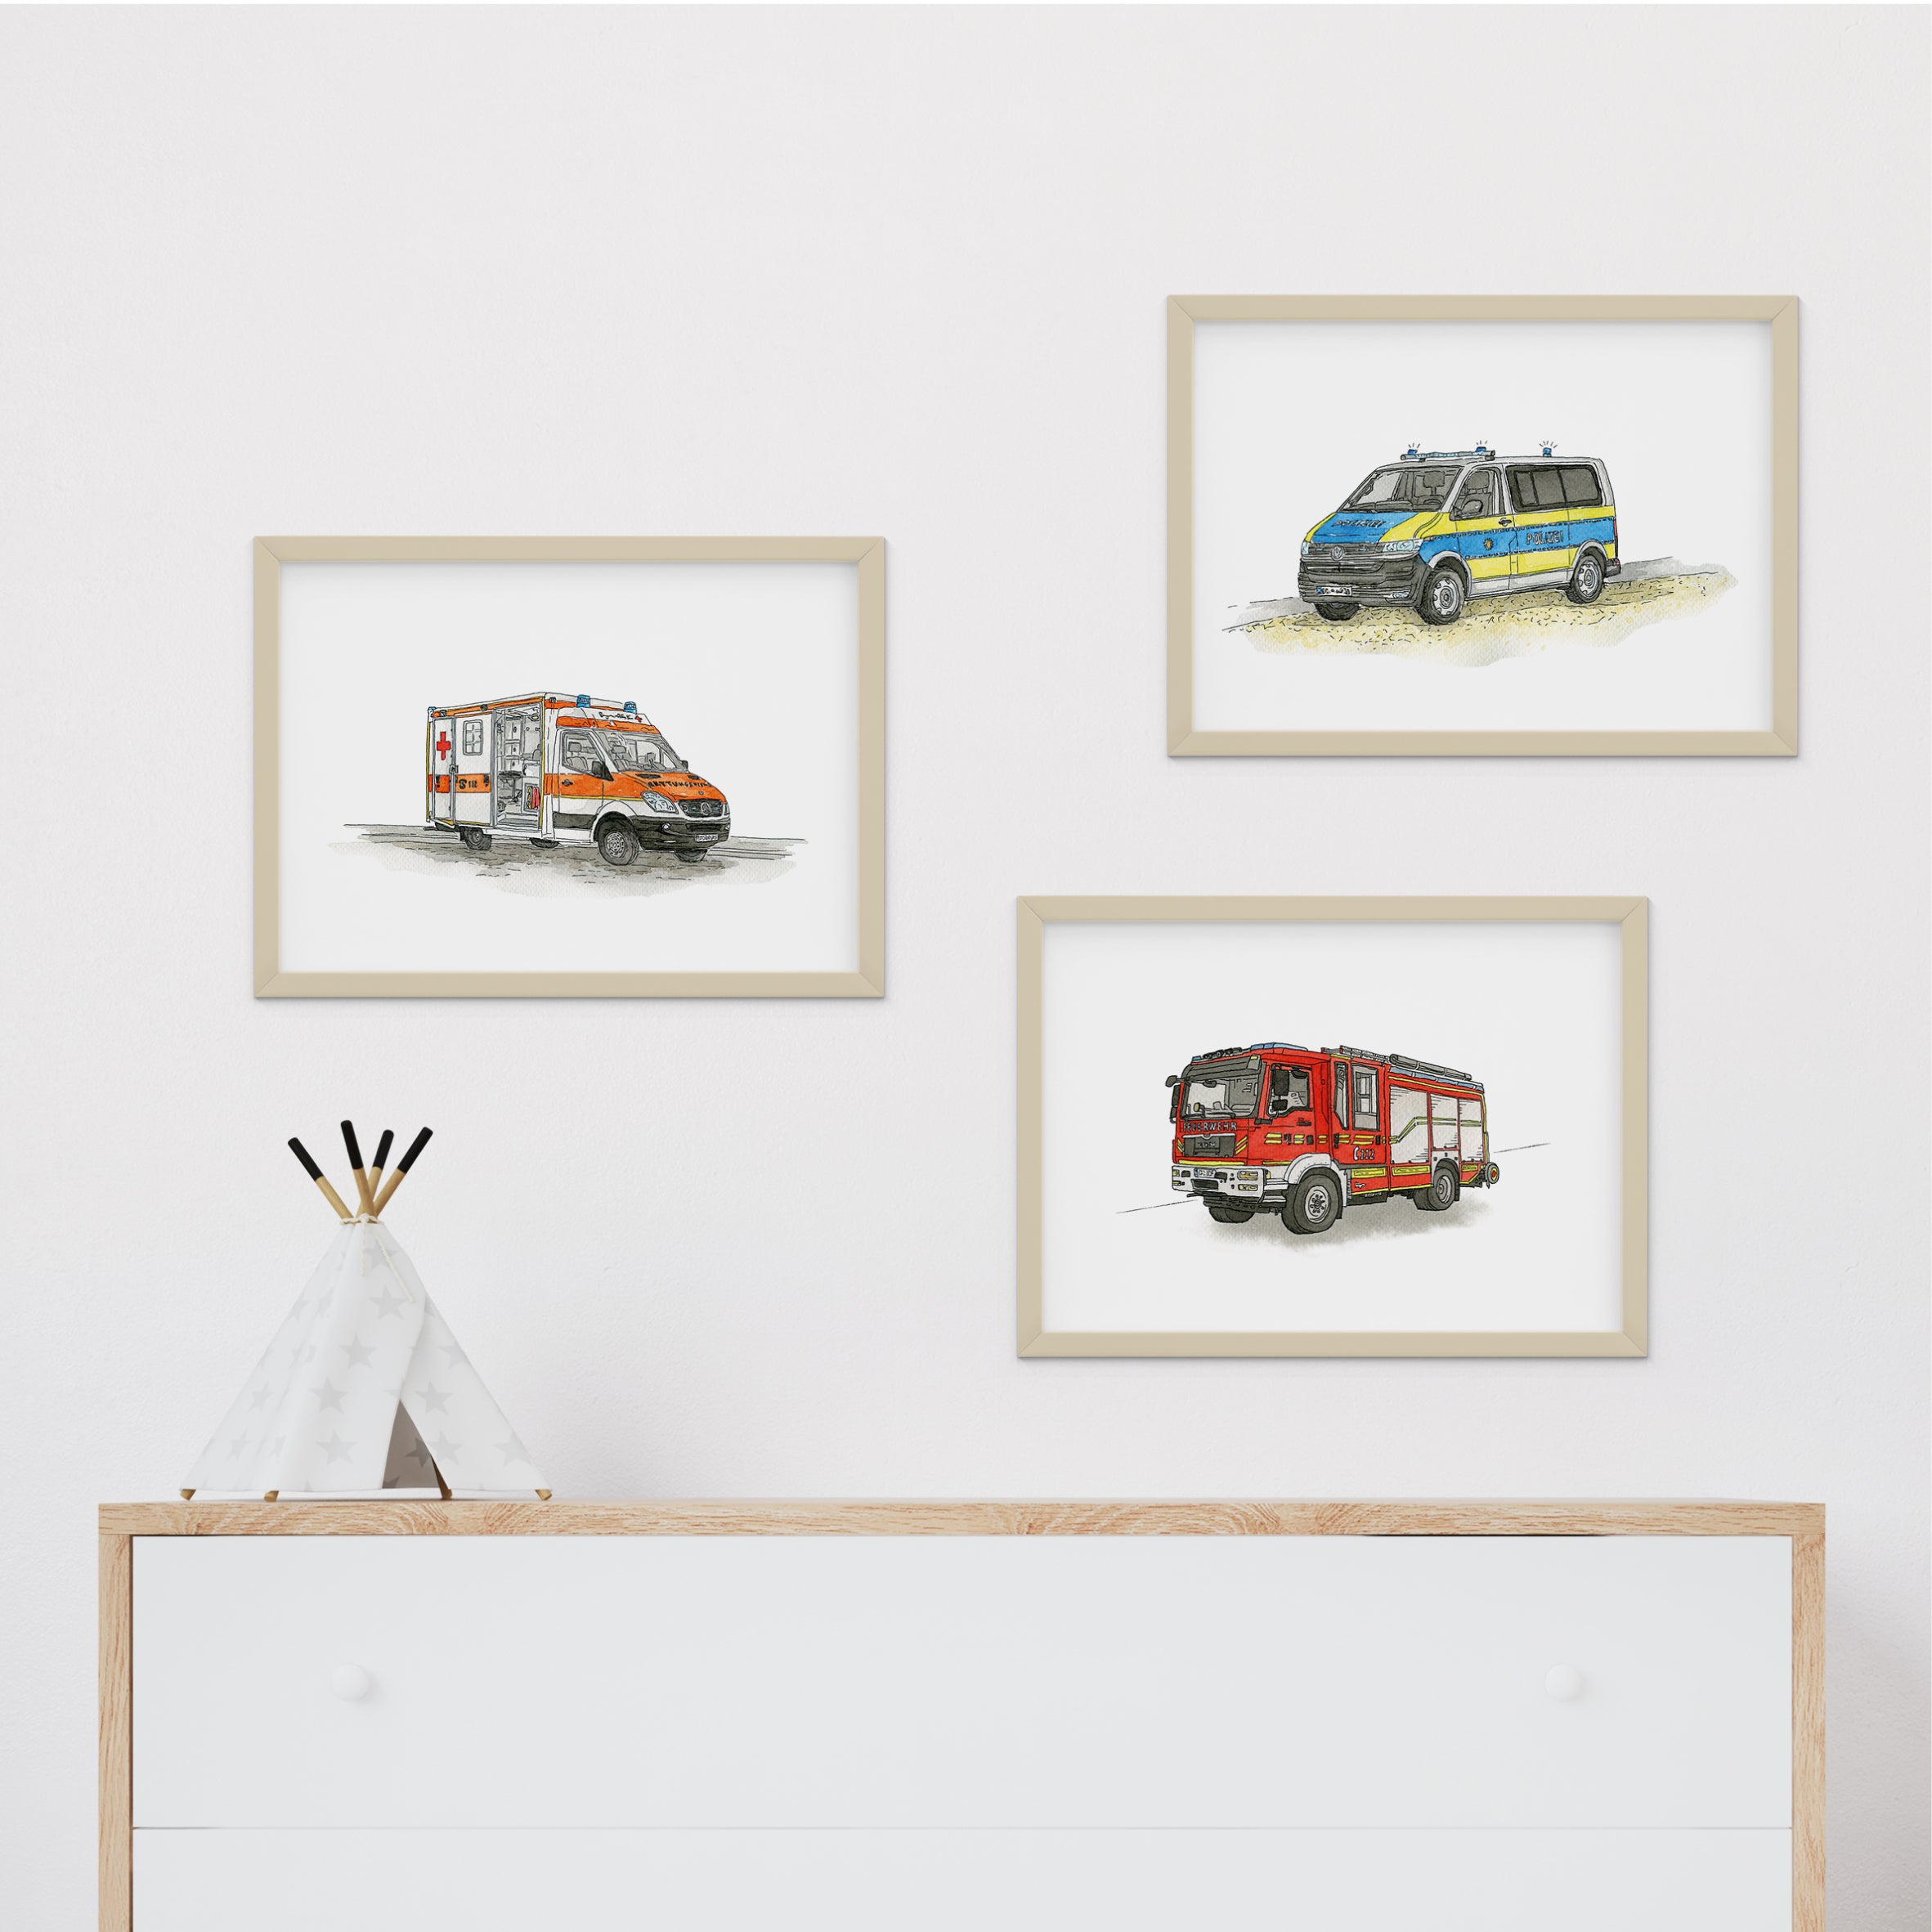 Vehicle Poster Set - Excavator, Loader and Tractor | 3 parts | personalised